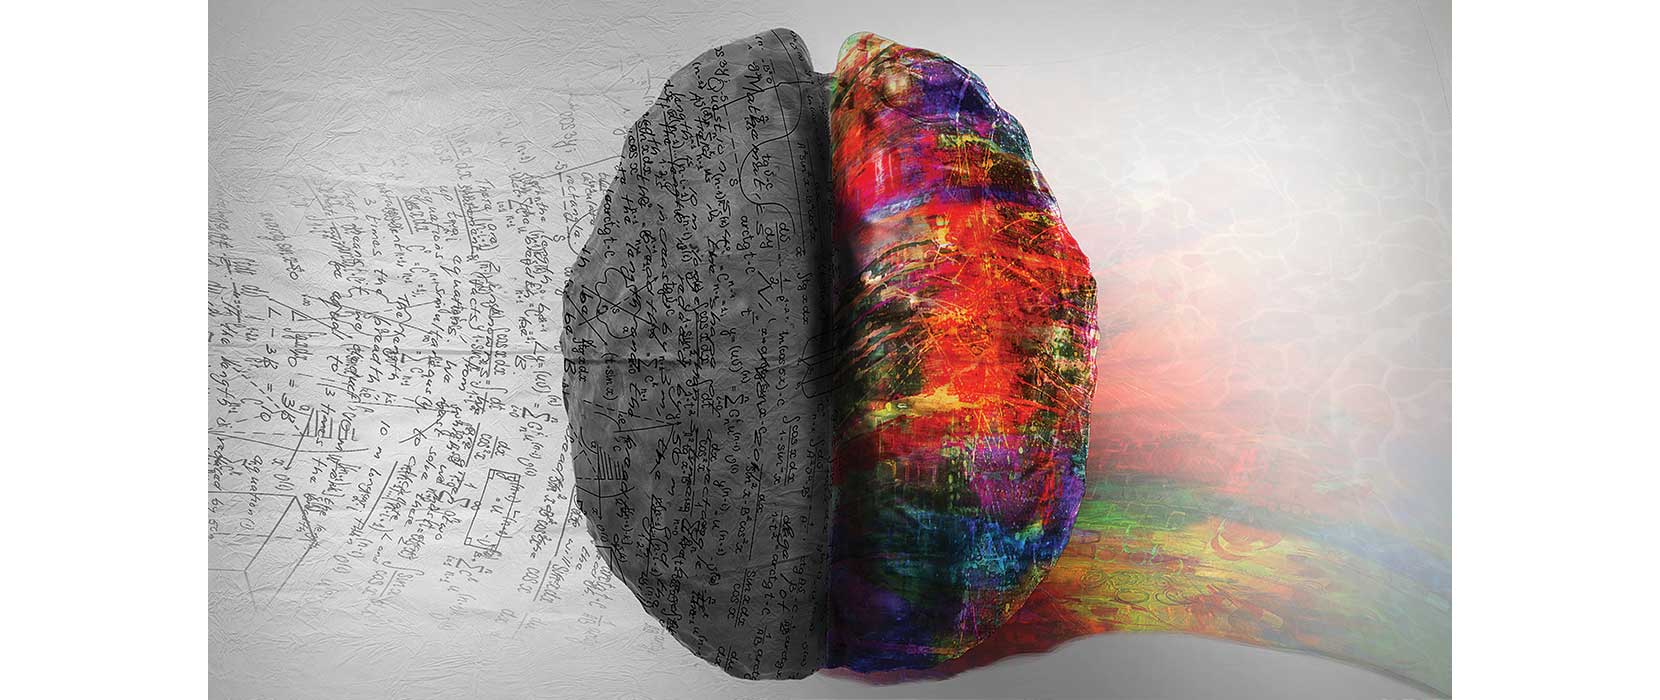 Graphic design of a brain, half in technicolour, half greyed out with scientific script over the greyed-out section.